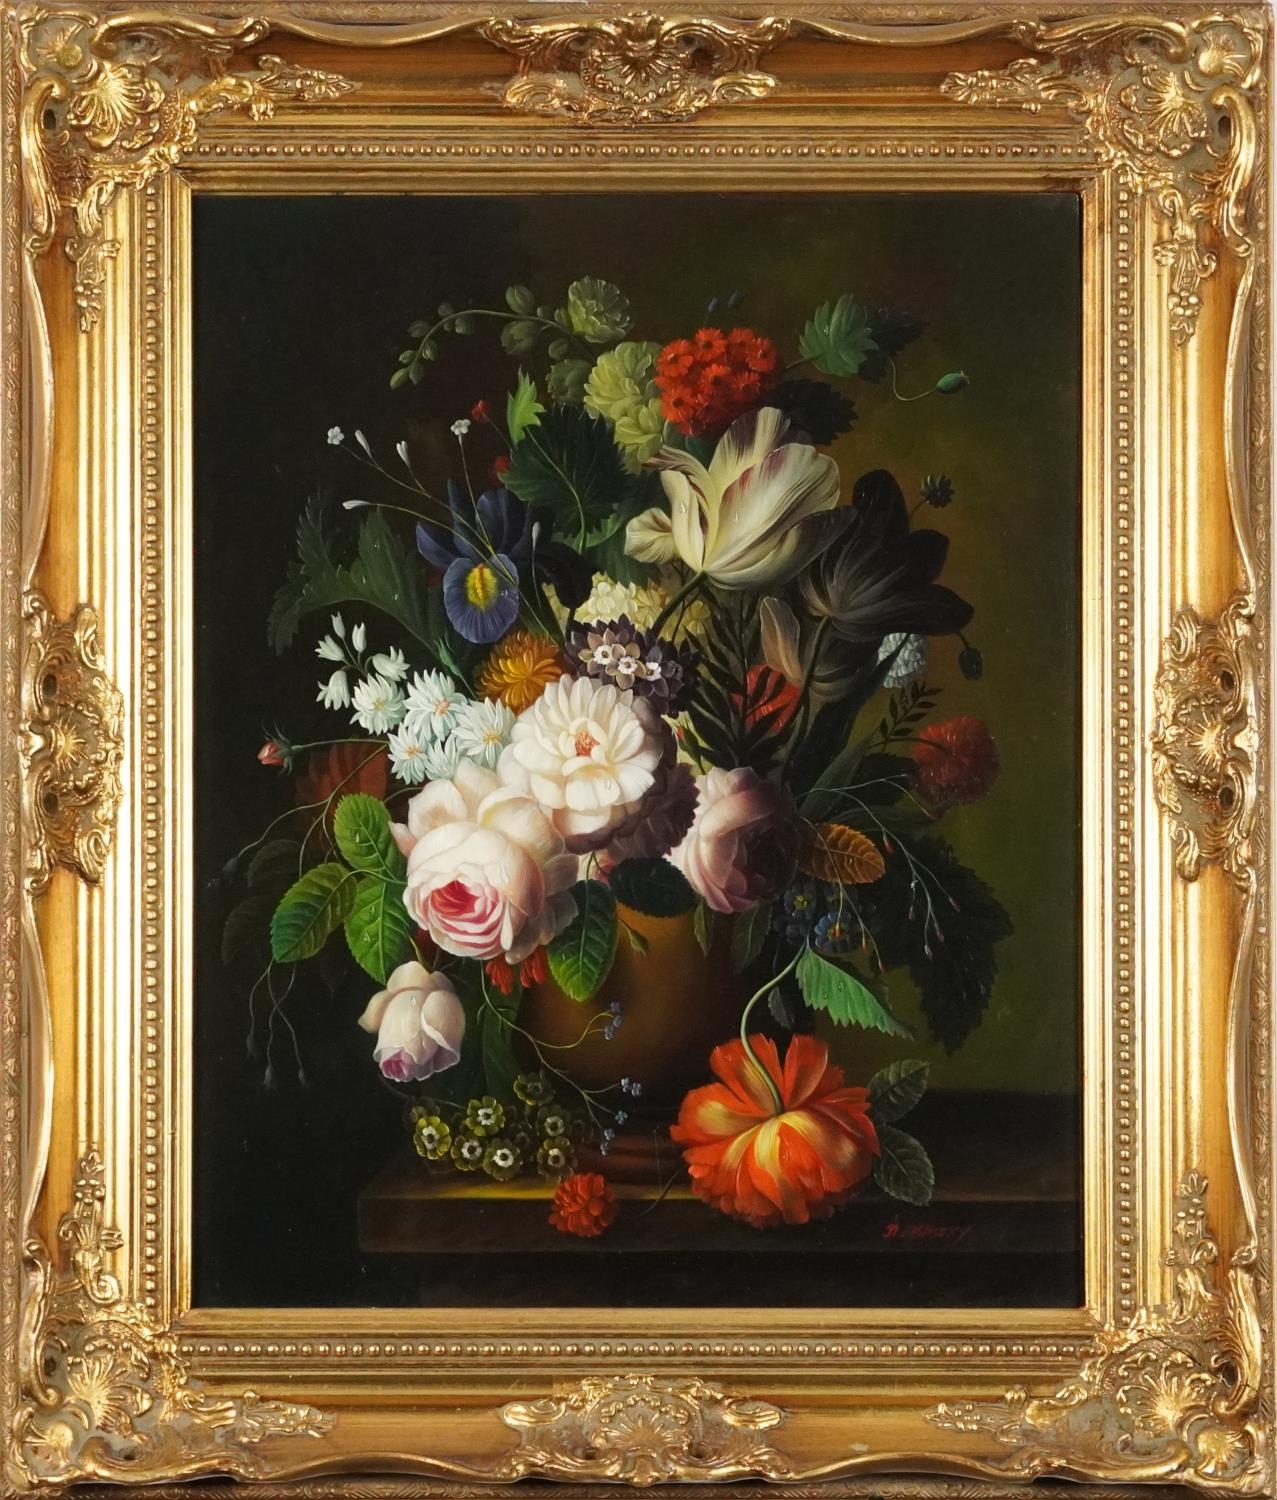 N Kinsky - Still life flowers in a vase, Old Master style oil on wood panel, mounted and framed, - Image 2 of 6